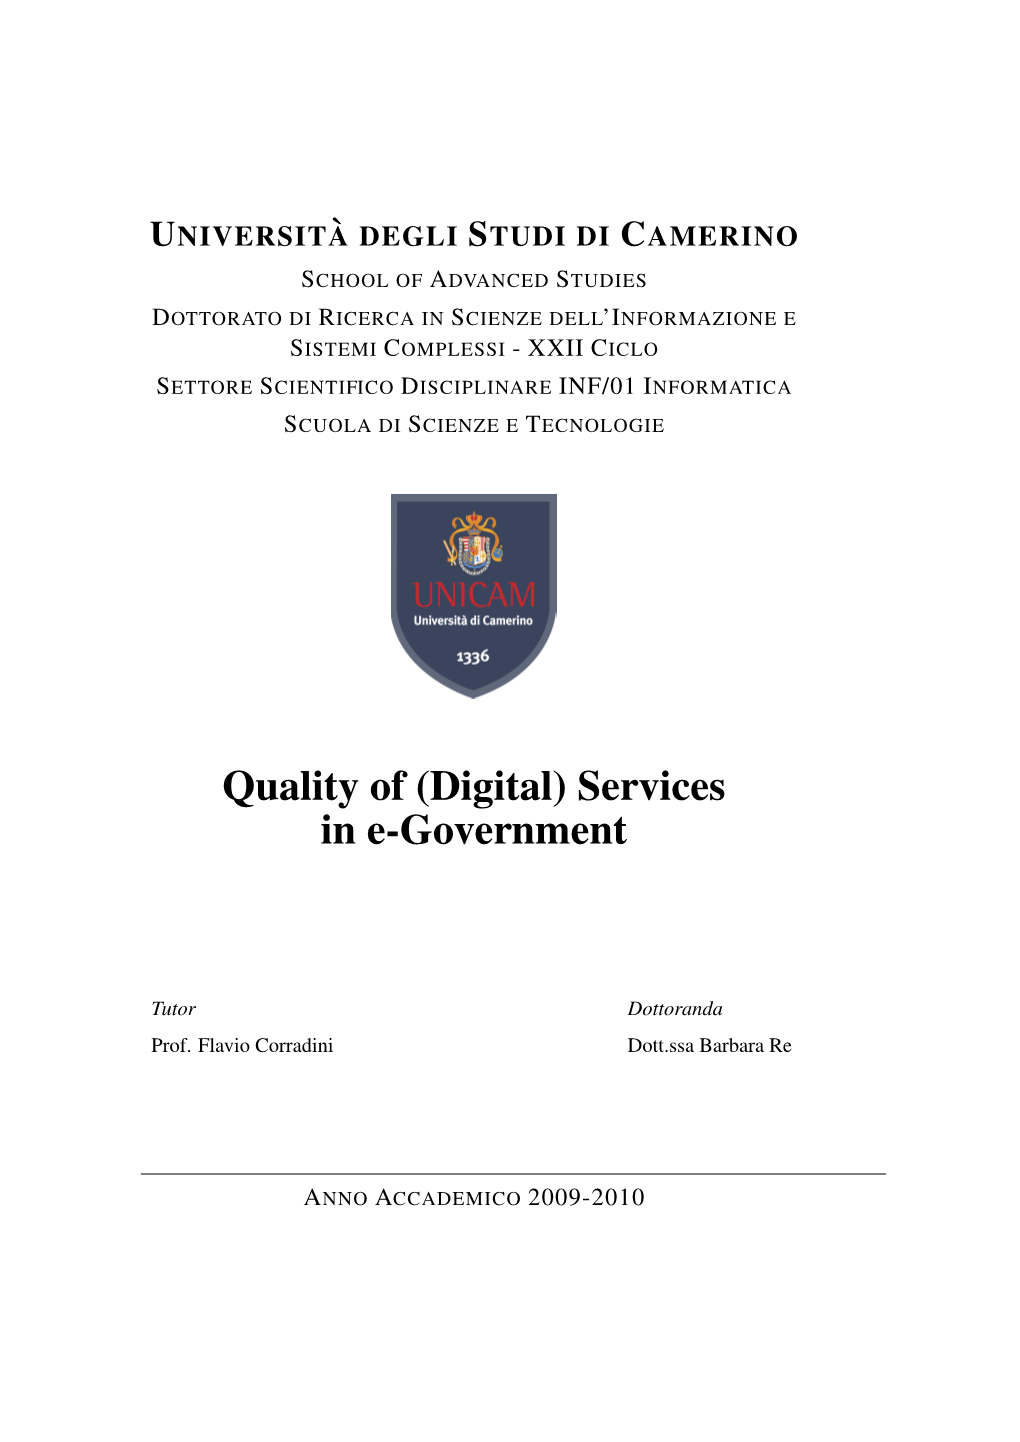 Quality of (Digital) Services in E-Government